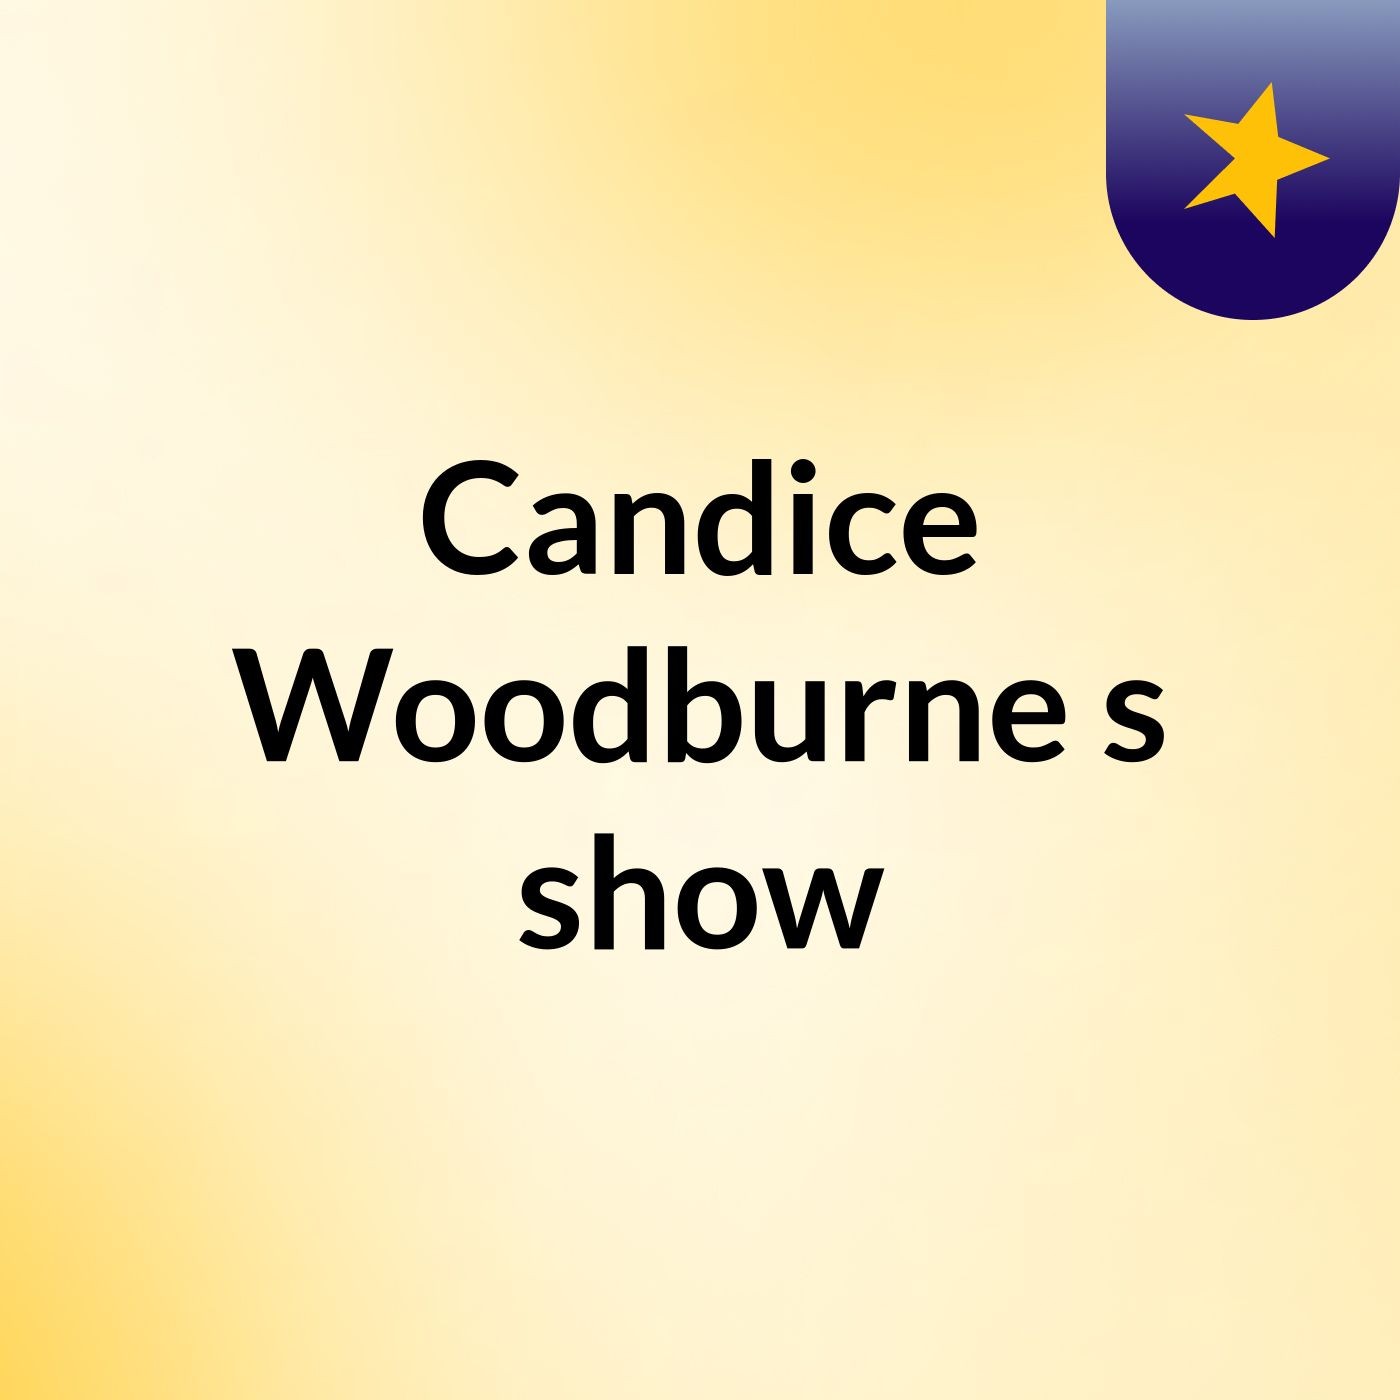 Candice Woodburne's show